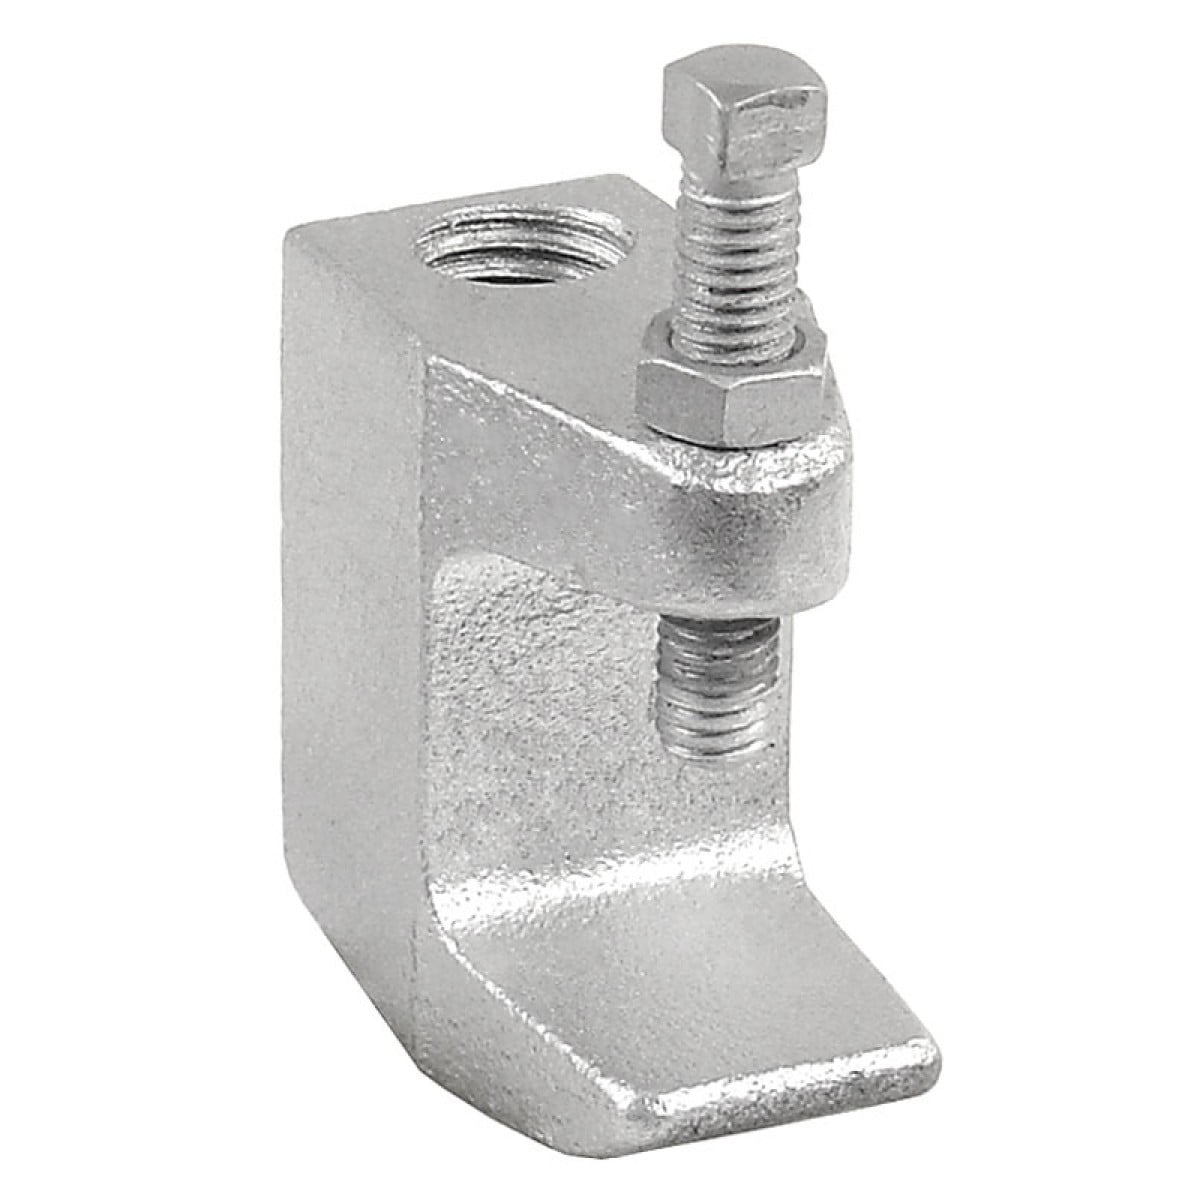 Steel City 215 Galvanized Malleable Iron 3/8" Beam Clamp Qty 4